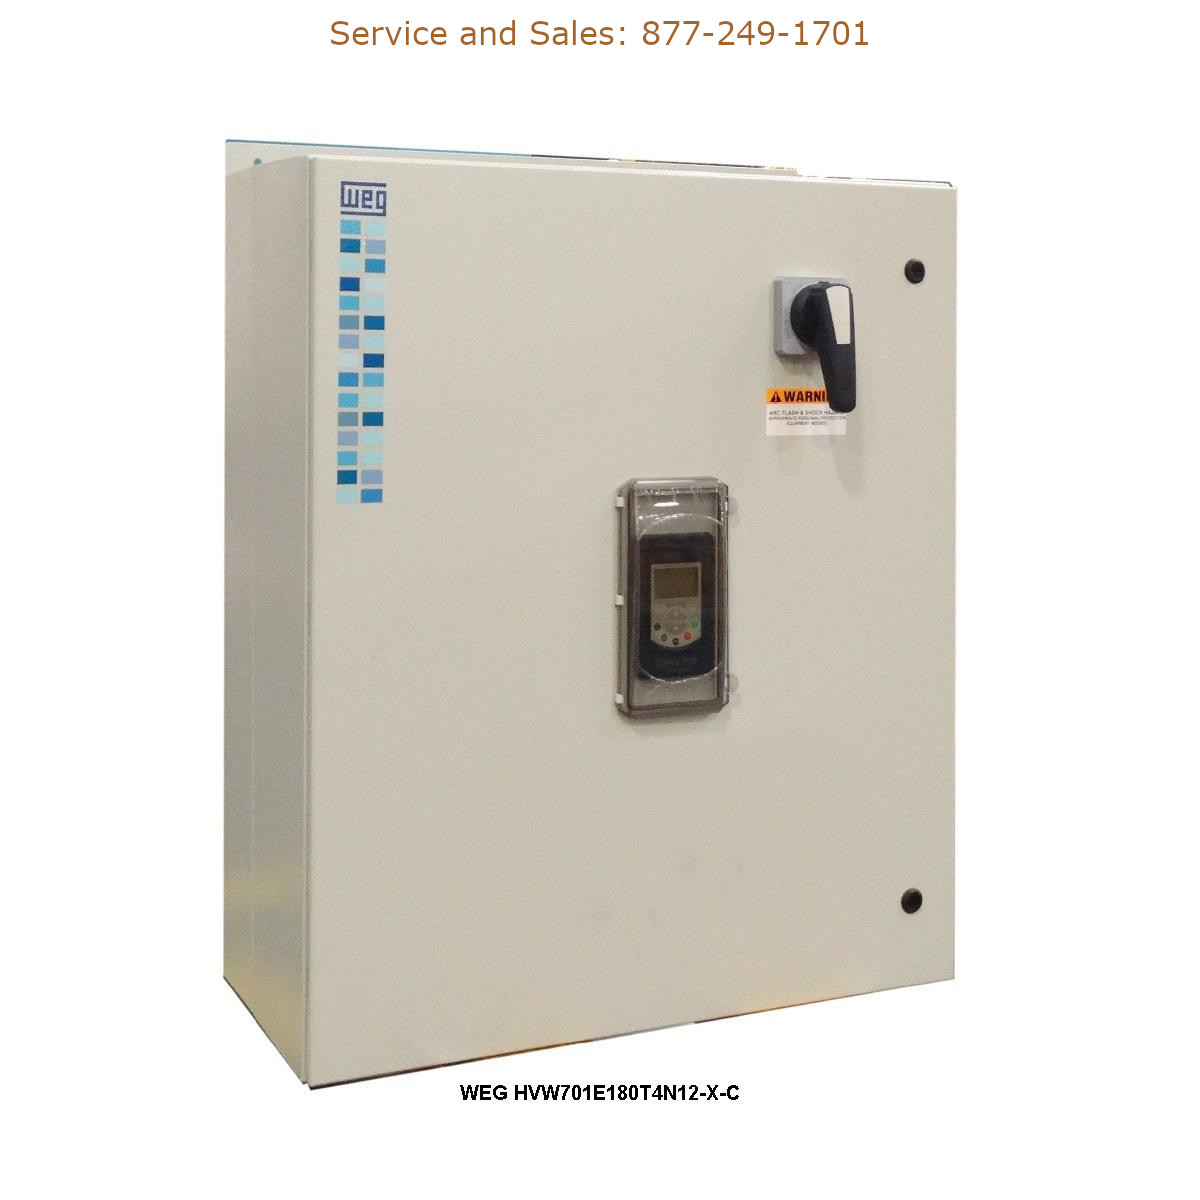 WEG HVW701E180T4N12-X-C WEG Model Number HVW701E180T4N12-X-C WEG Drives, Variable Speed Drives Repair Service, Troubleshooting, Replacement Parts https://gesrepair.com/wp-content/uploads/2022/WEG/WEG_HVW701E180T4N12-X-C_Drives_Variable_Speed_Drives.jpg